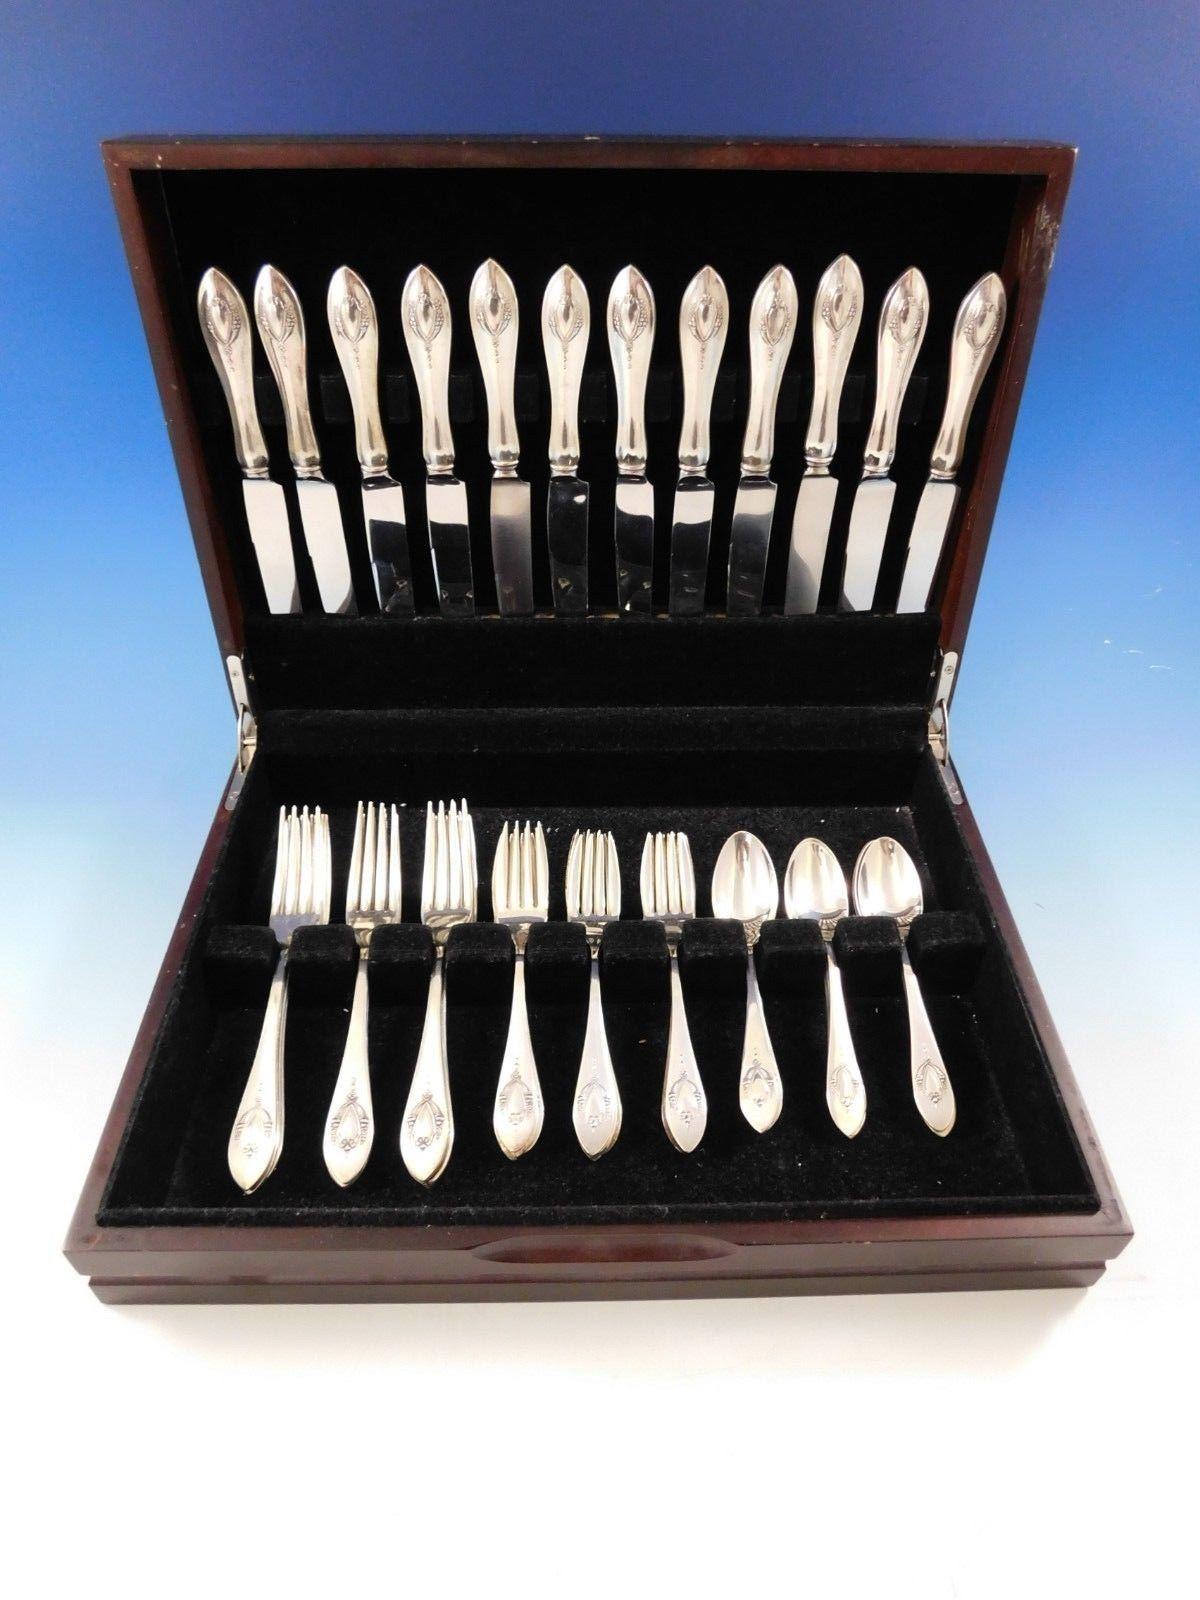 Mount Vernon by Lunt sterling silver flatware set, 48 pieces. This set includes:

12 knives, 9 3/8